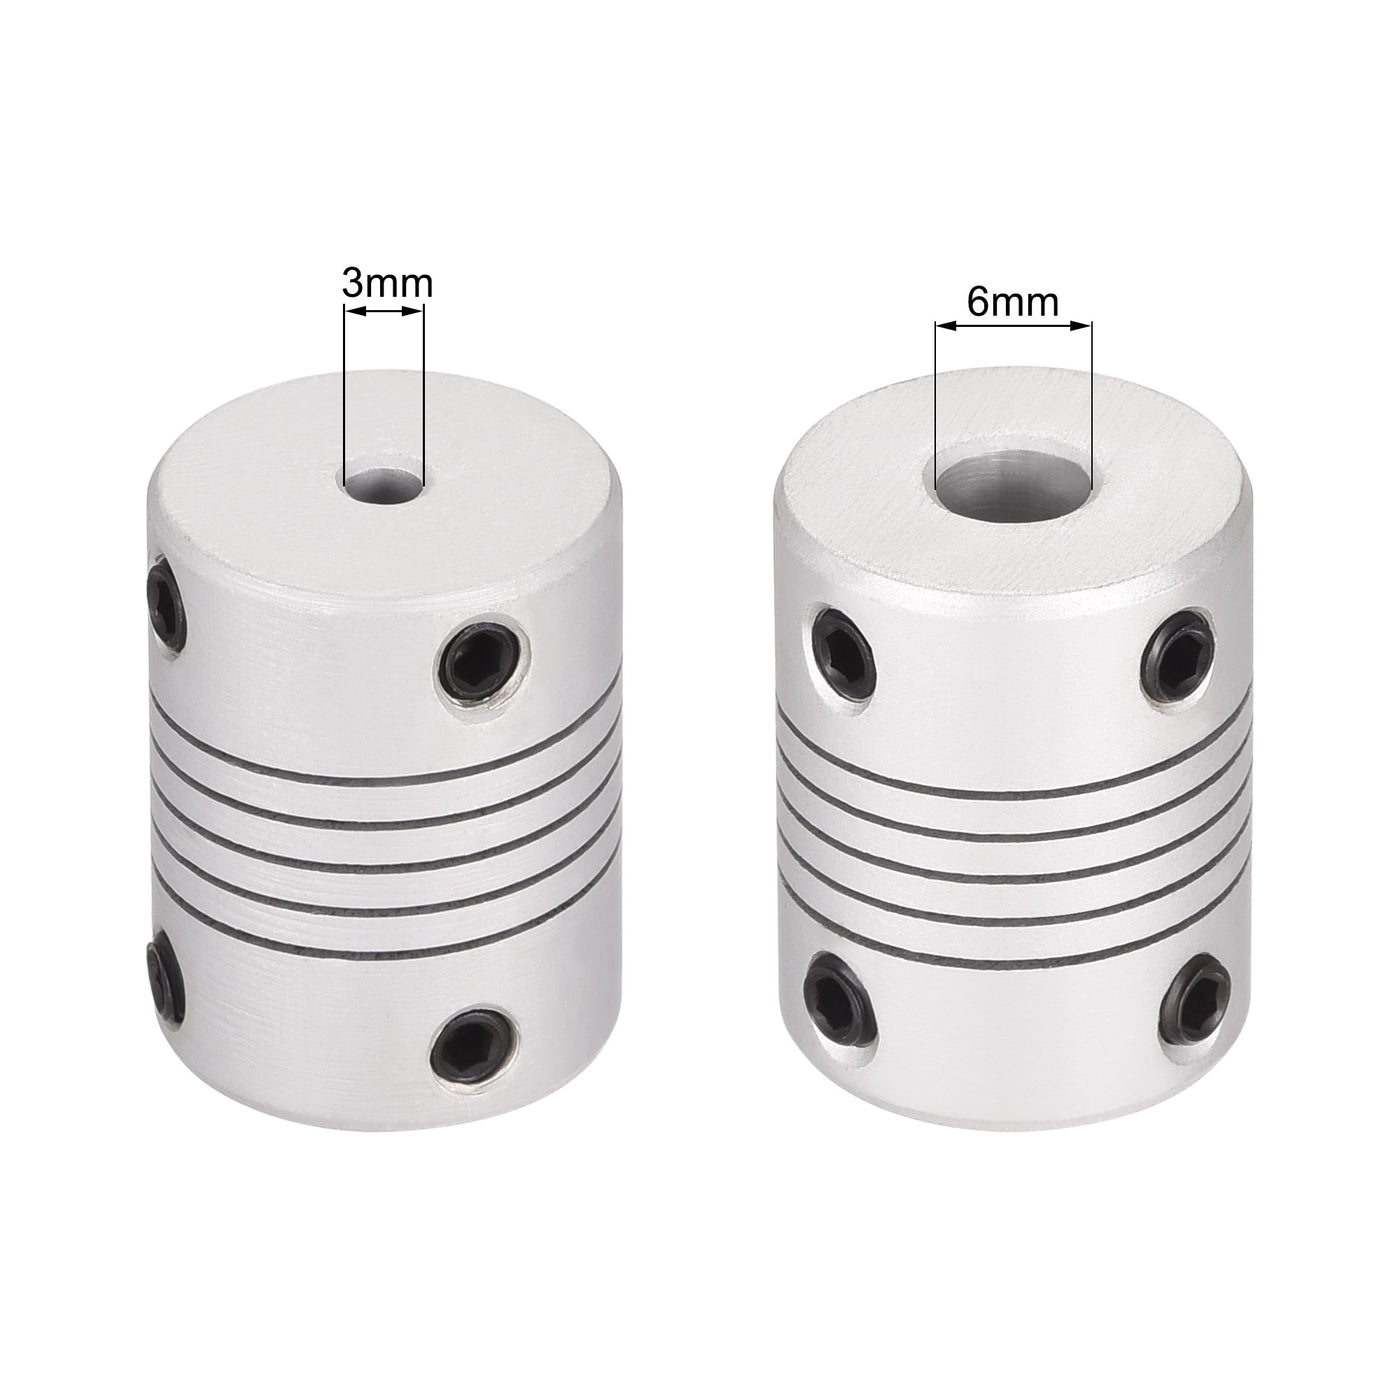 uxcell Uxcell 3mm to 6mm Aluminum Alloy Shaft Coupling Flexible Coupler L25xD19 Silver,2pcs